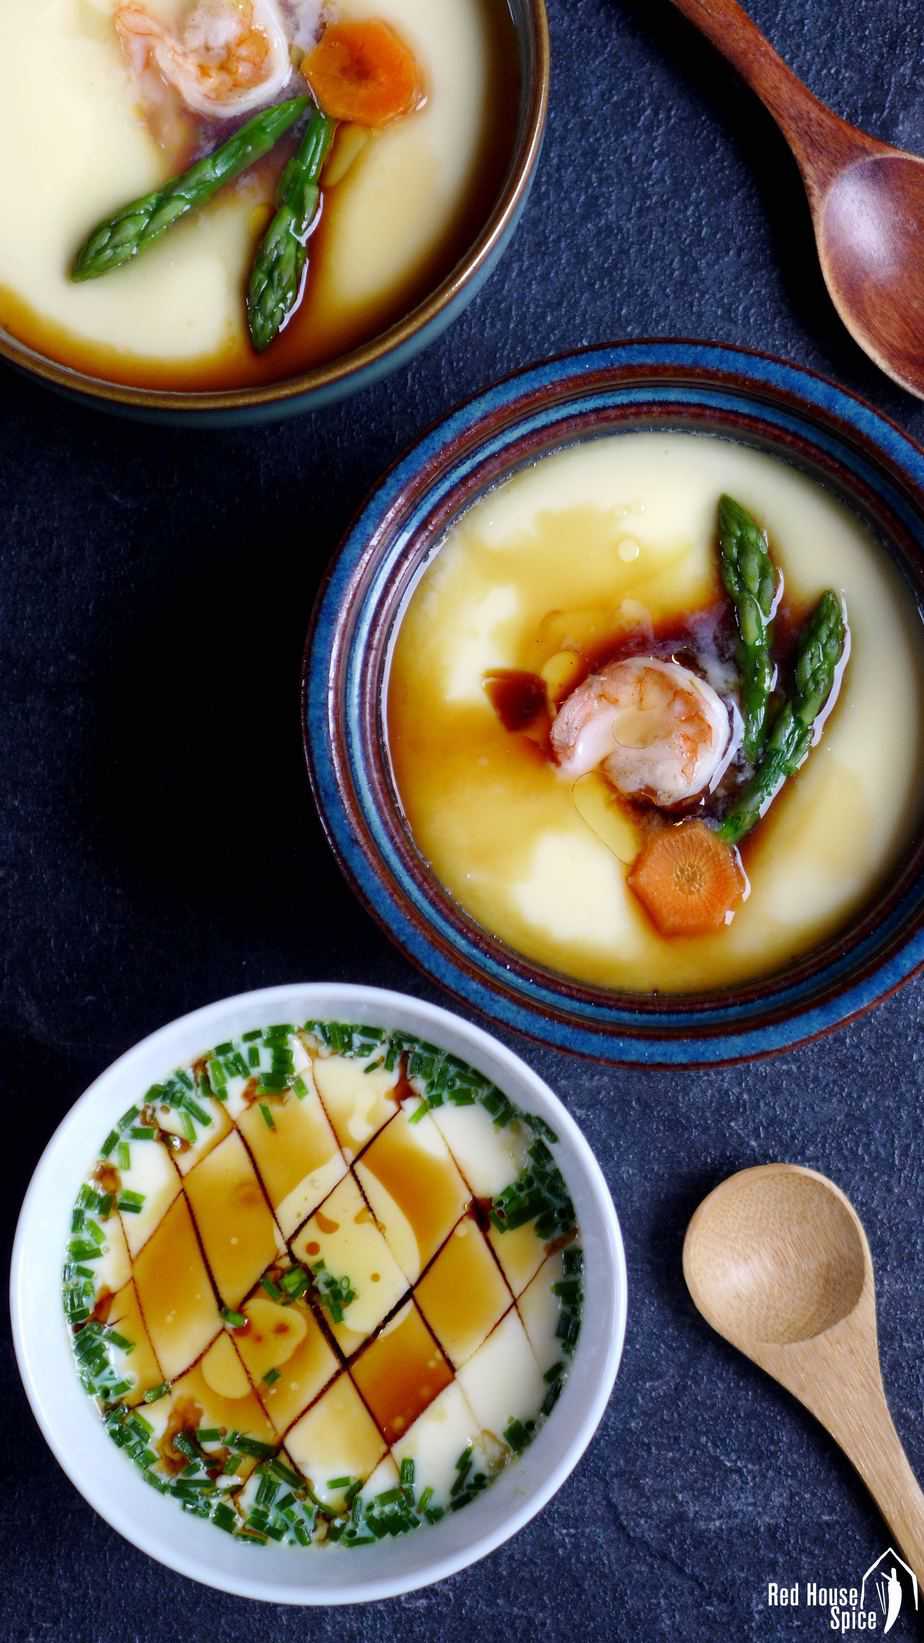 To make basic steamed eggs more visually appetizing, you can garnish it with prawns and vegetables like asparagus, carrot, etc. 